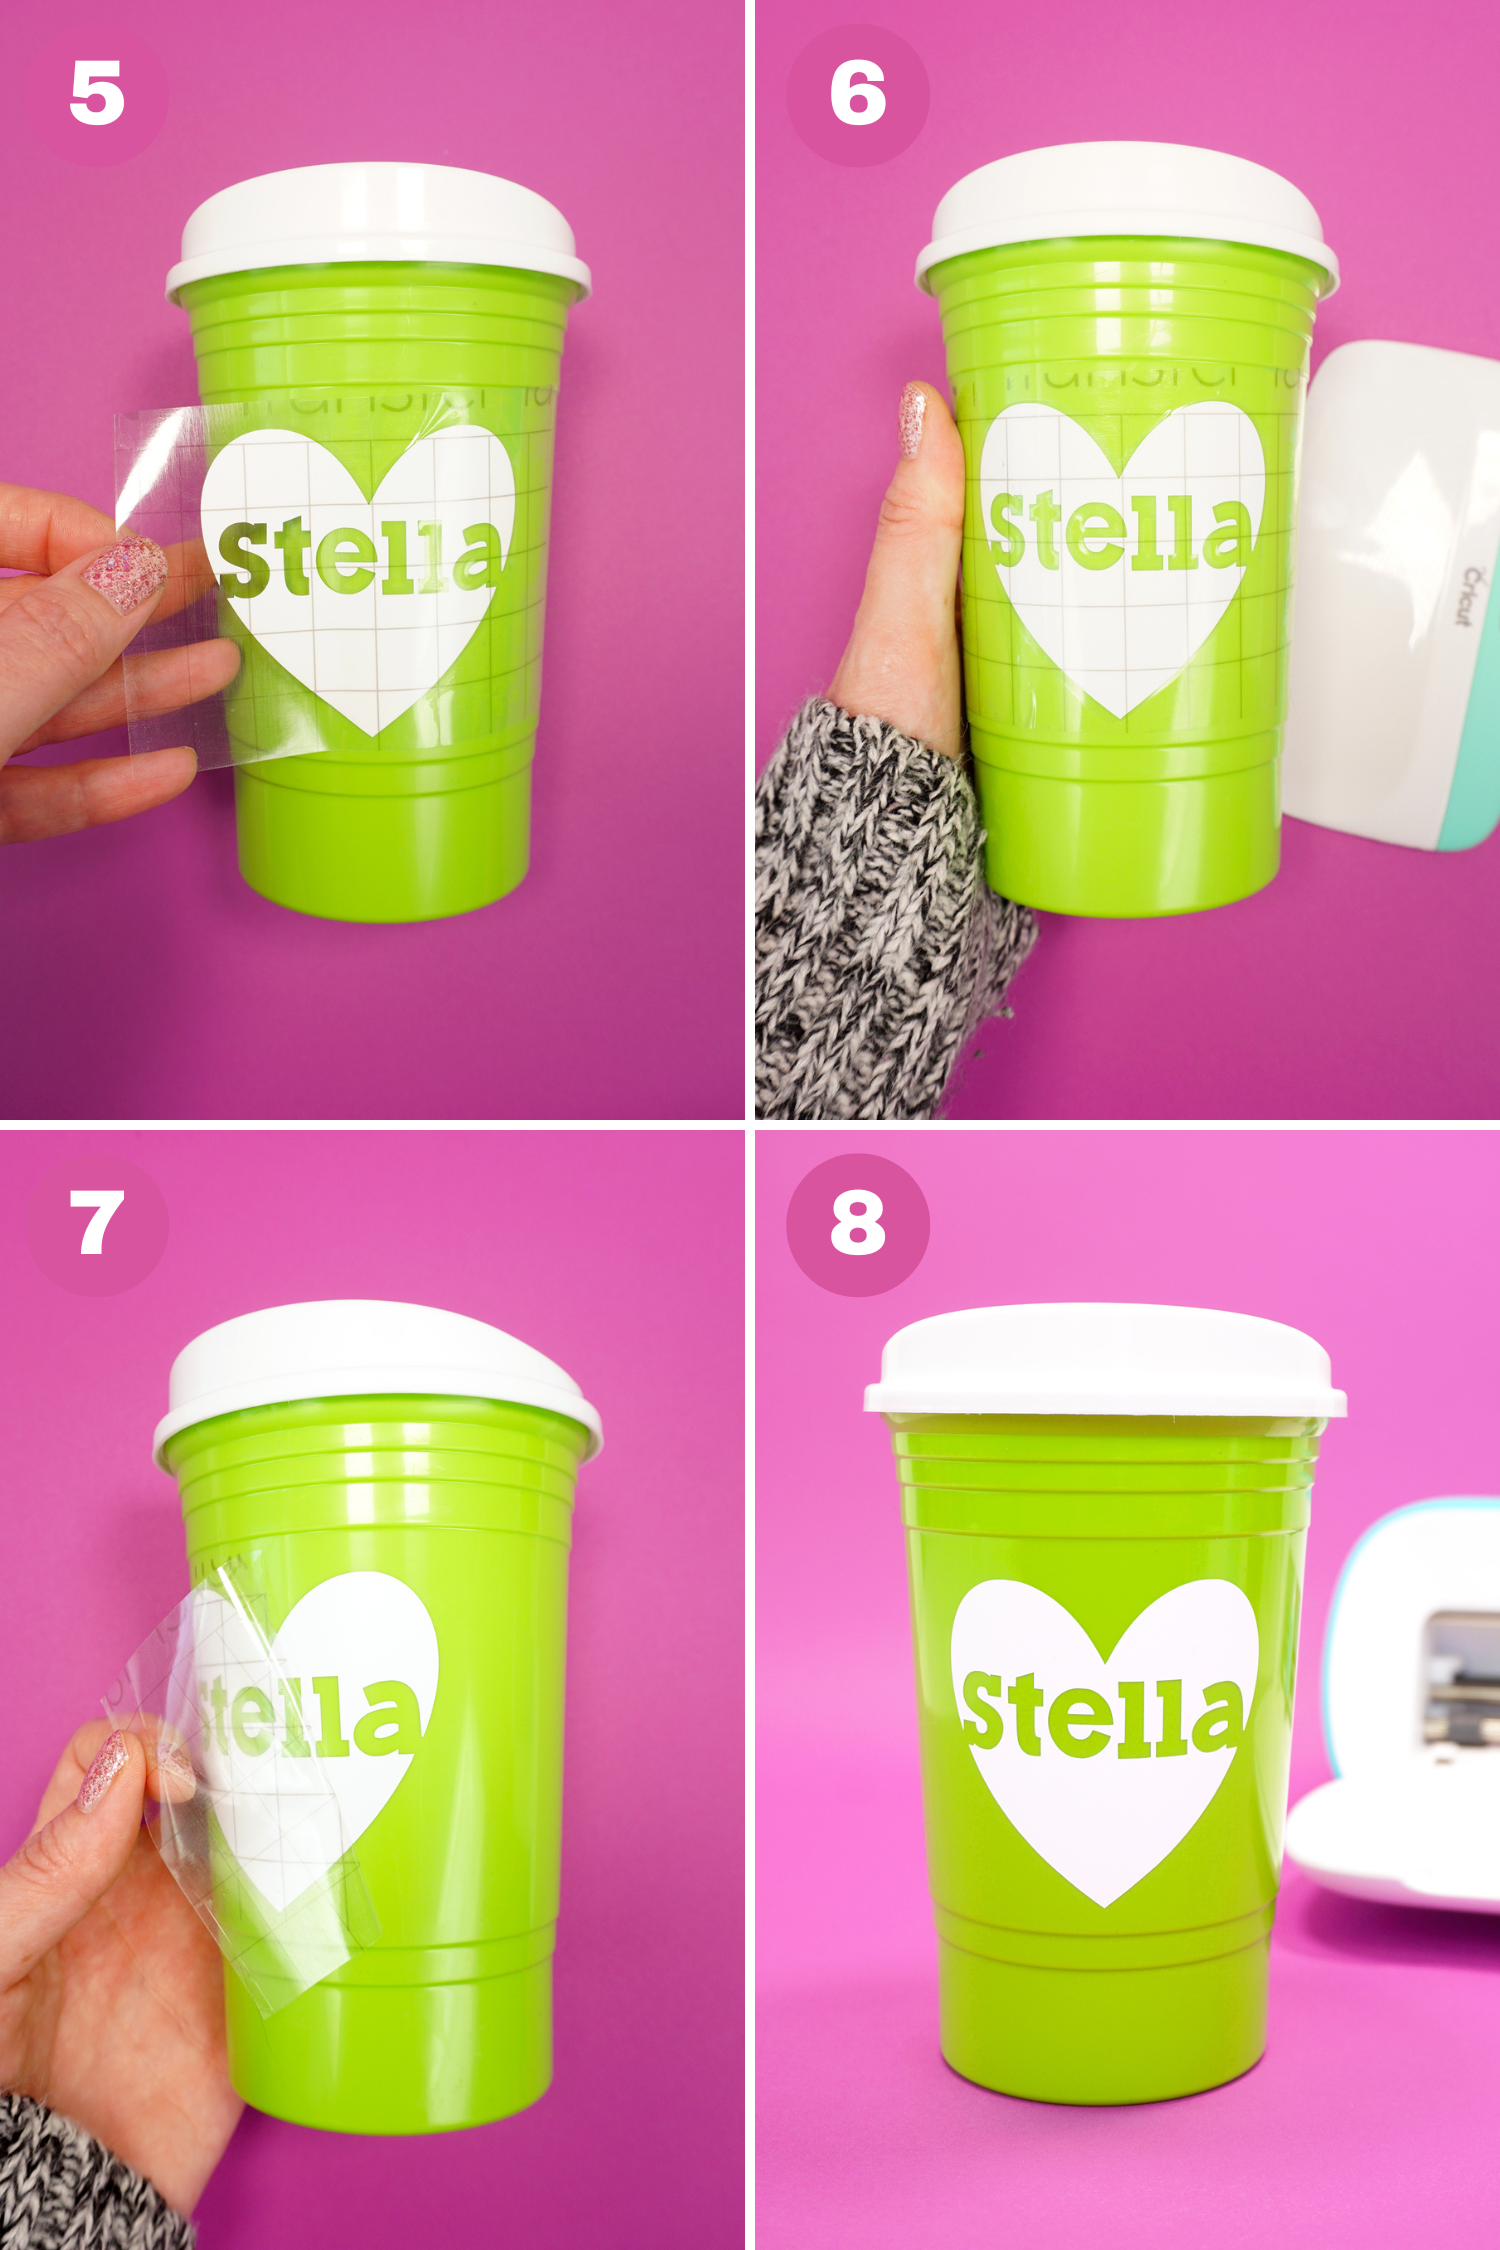 Collage of 4 steps in the "How to Use Transfer Tape" process - applying vinyl to plastic cup, burnishing, removing the transfer tape, and the finished cup